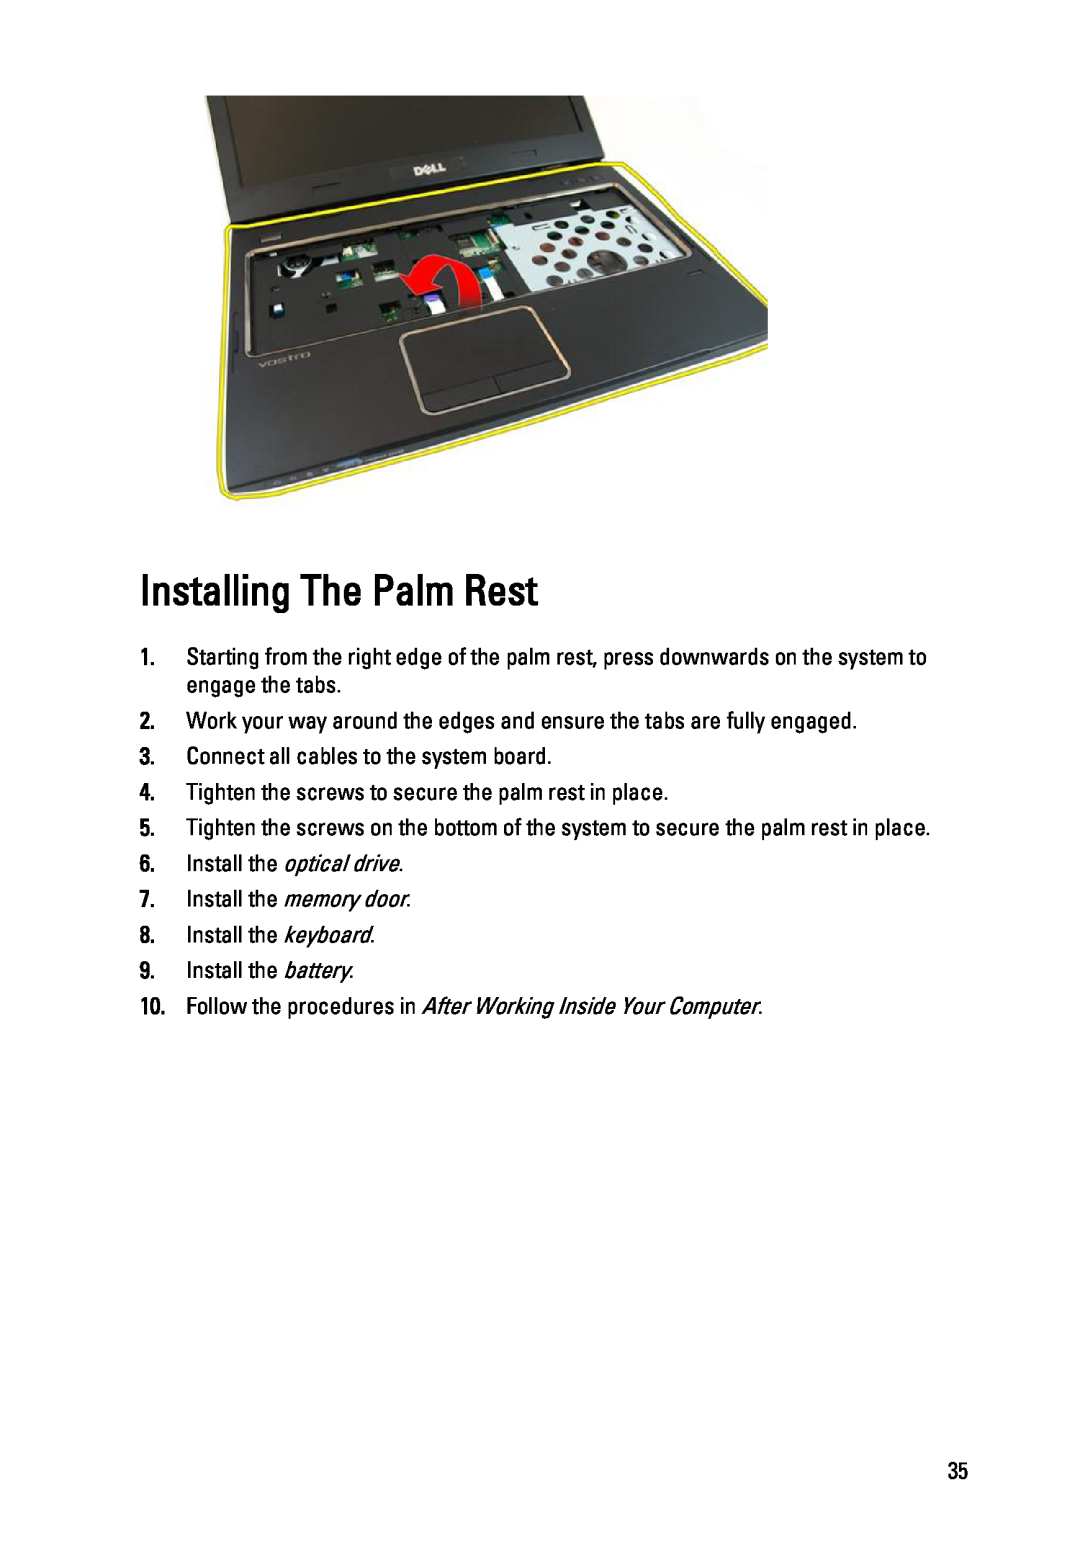 Dell 3450 owner manual Installing The Palm Rest, Follow the procedures in After Working Inside Your Computer 